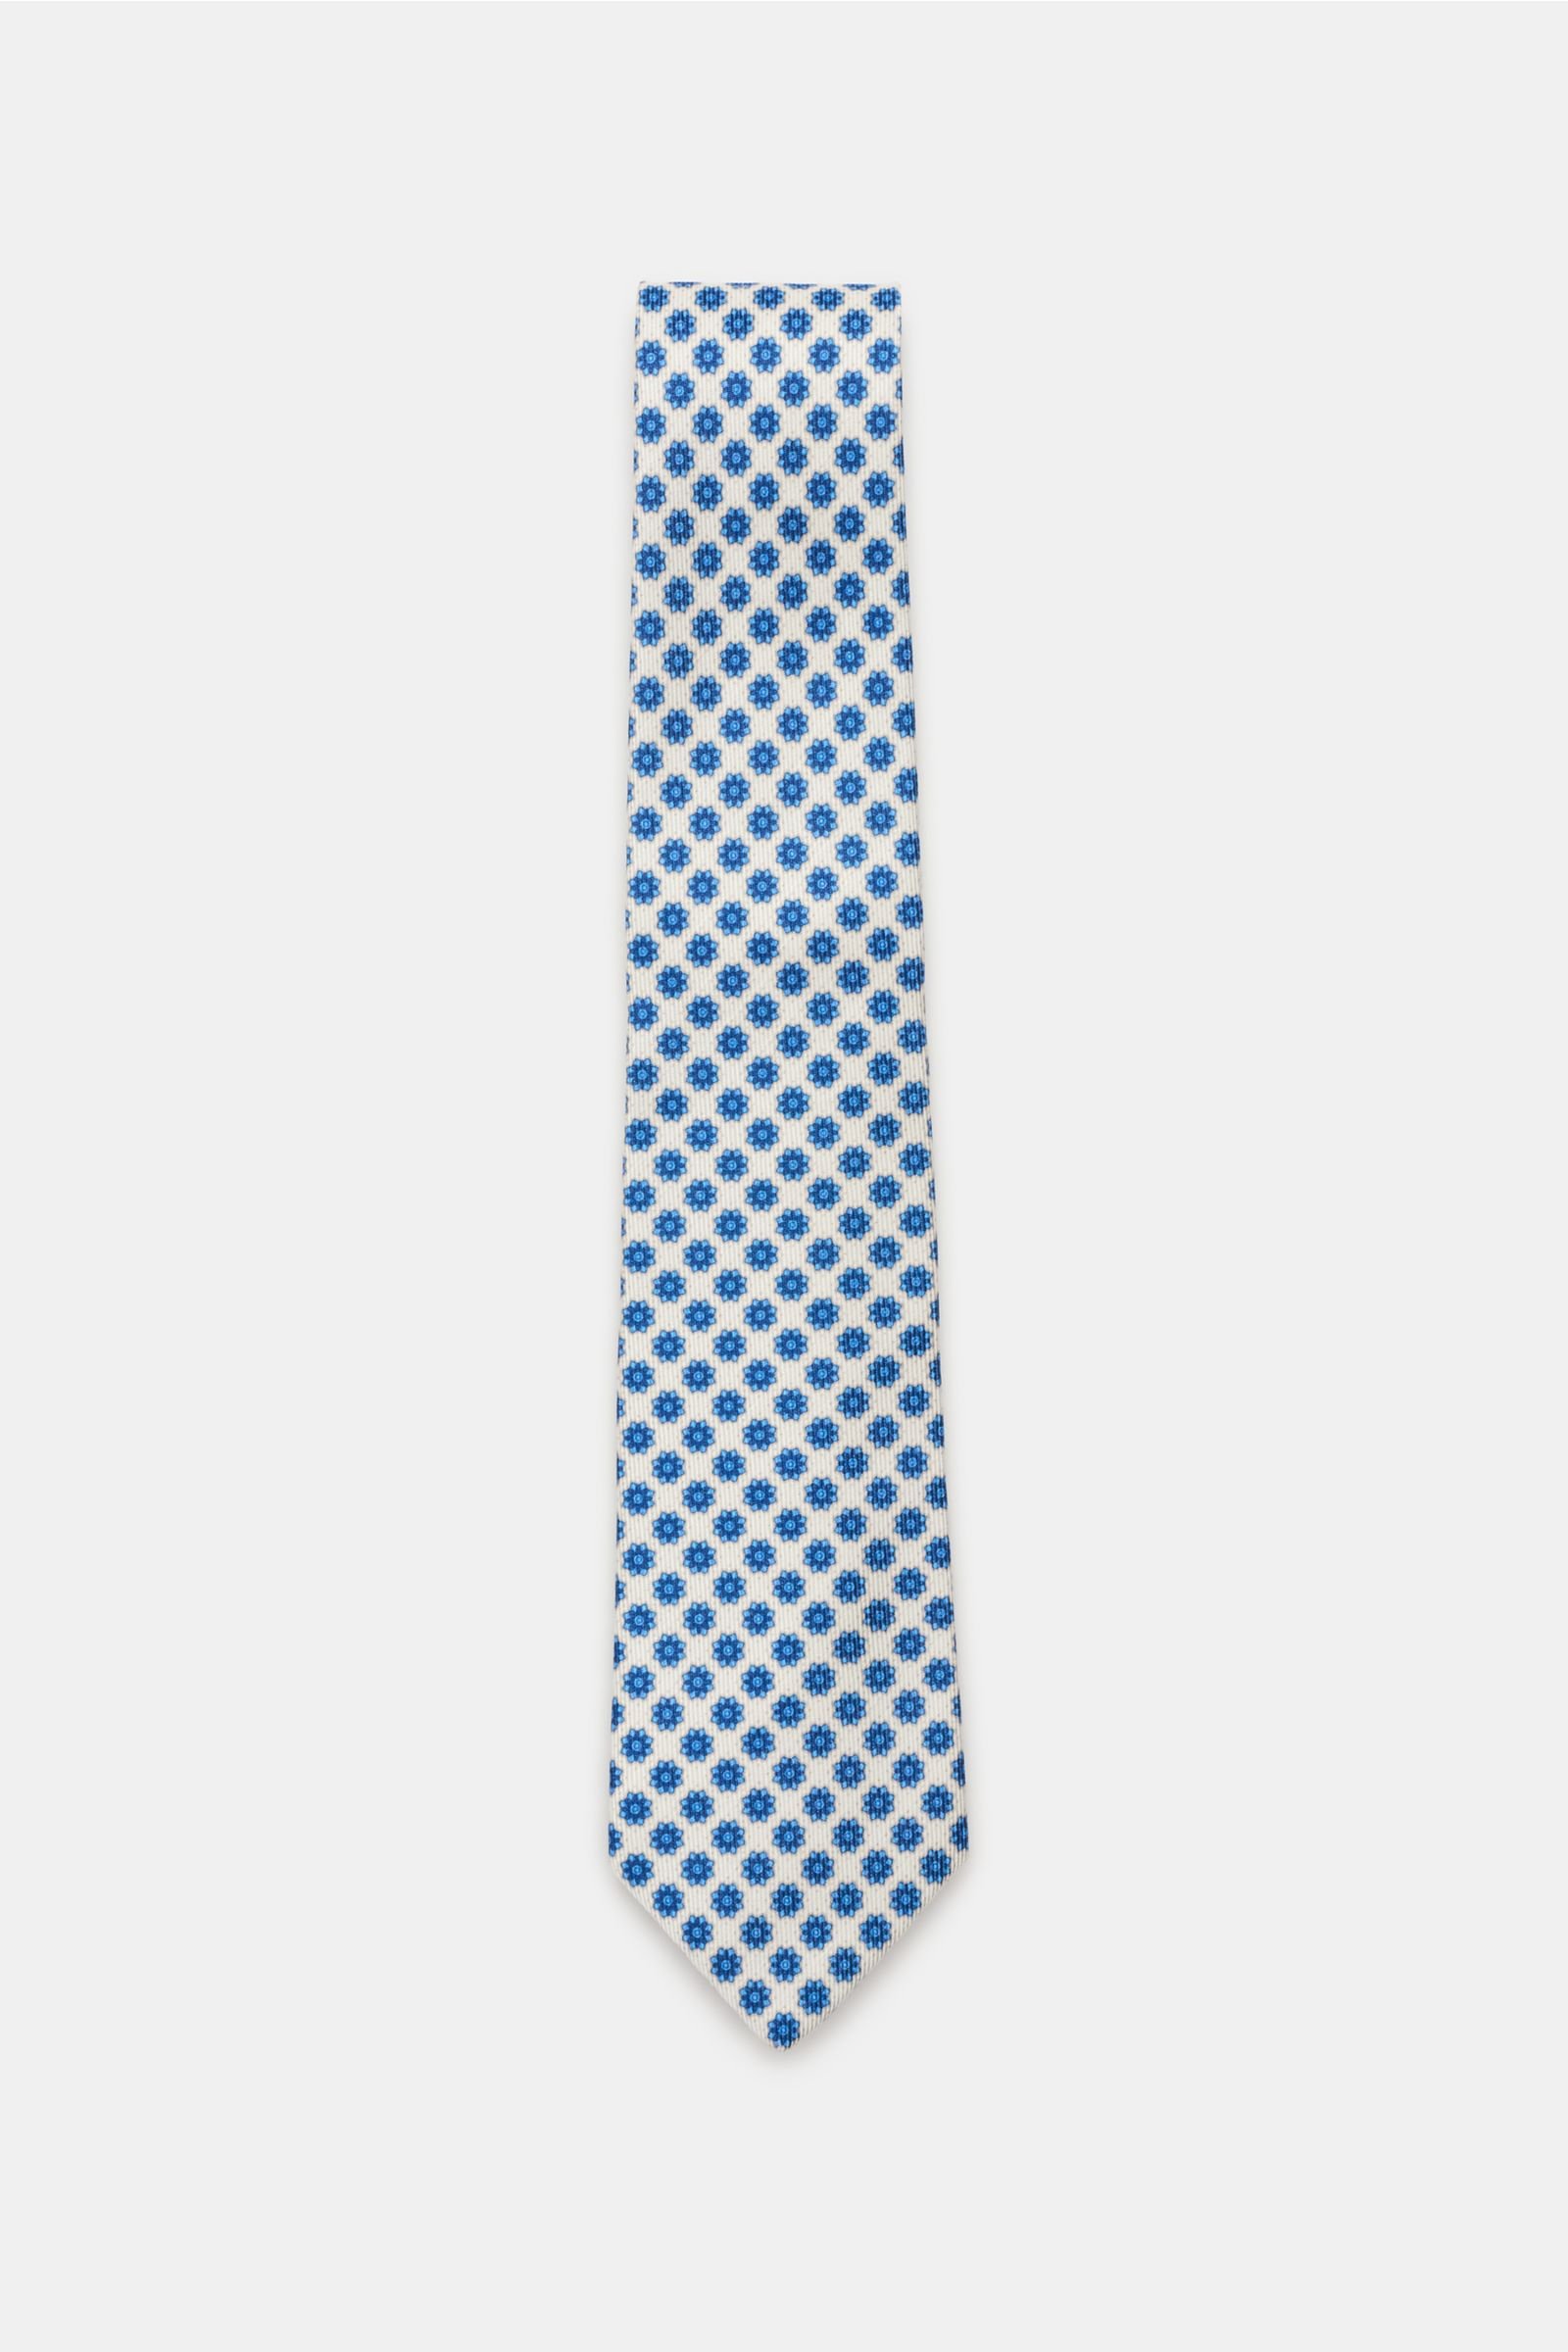 Tie blue/white patterned